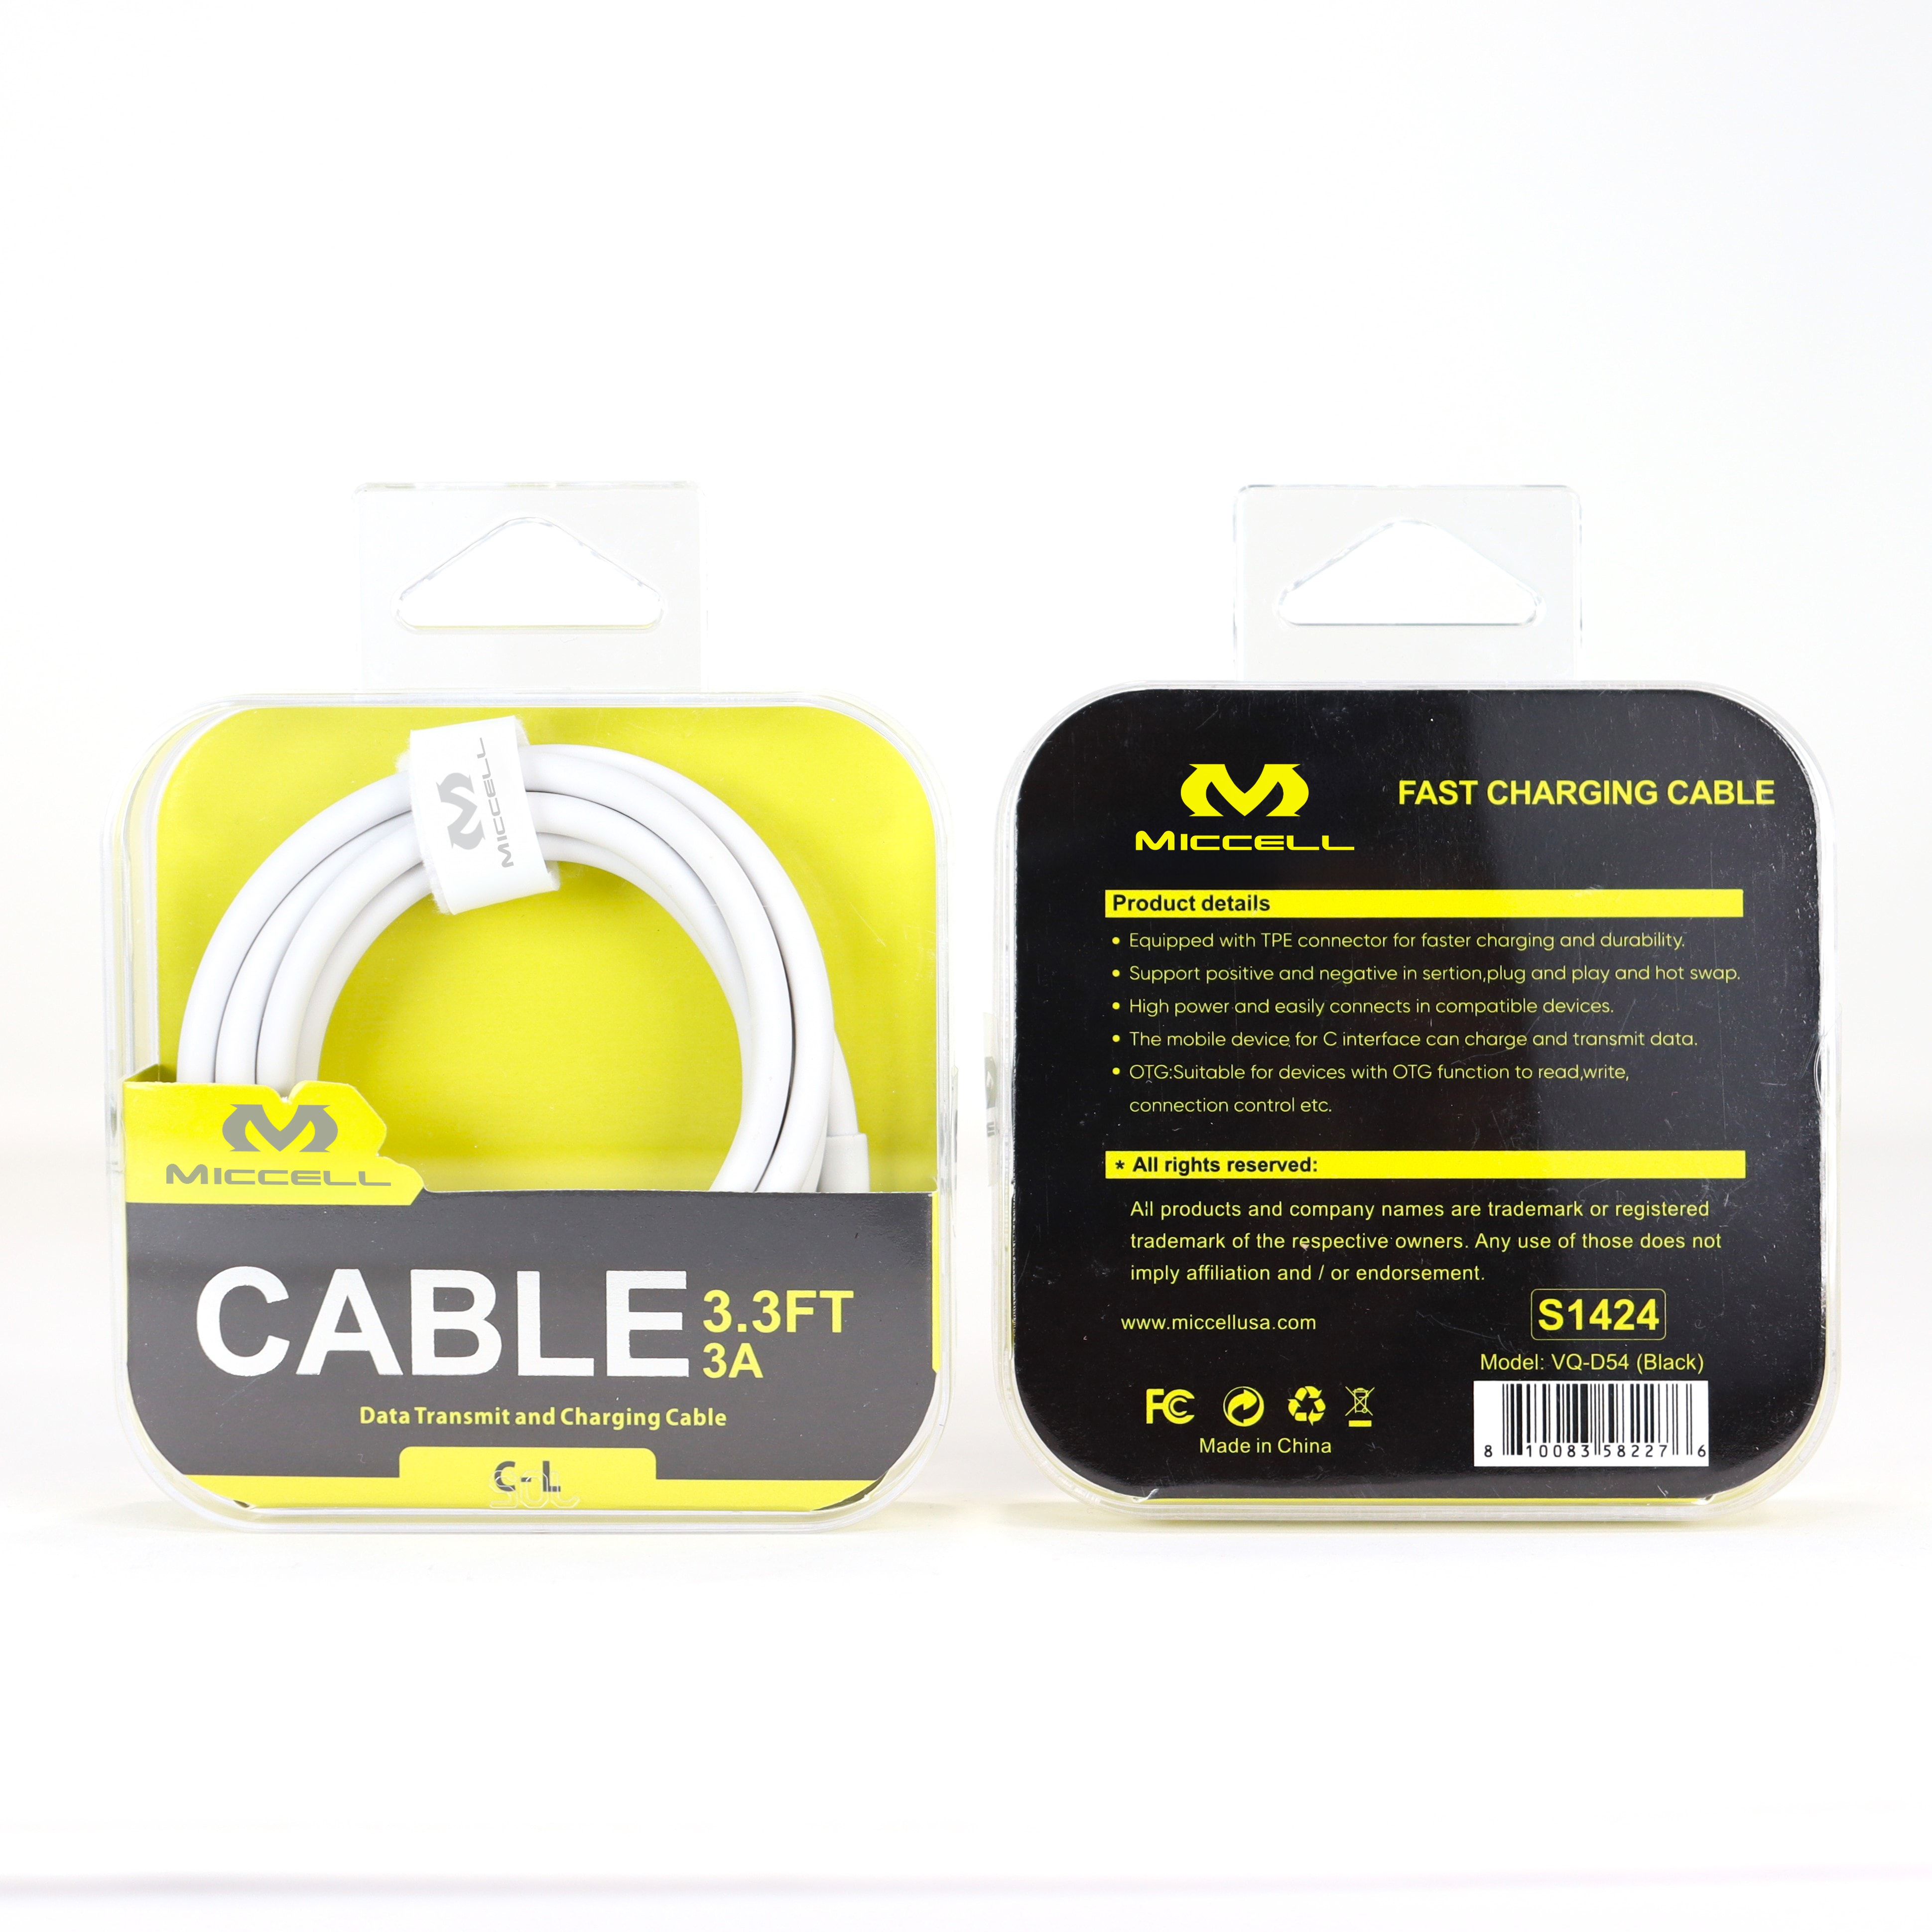 S1424 Miccell C to L 3.3ft Cable (VQ-D54) Acrylic Pack